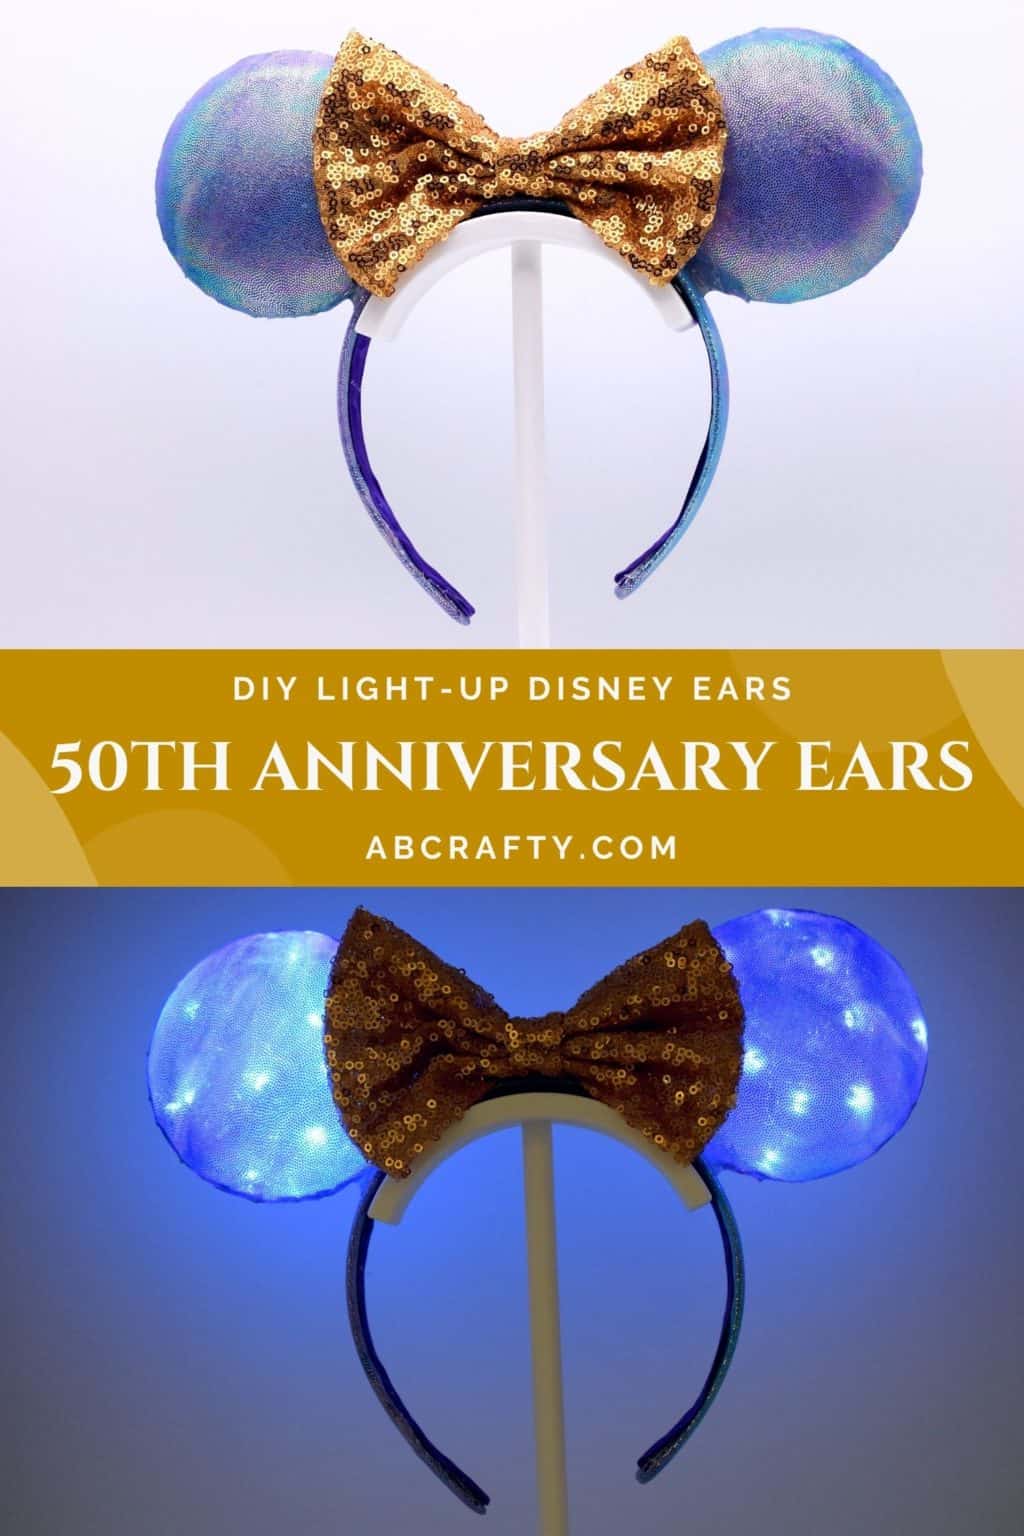 diy purple and blue earidescent mickey mouse ears both in the light and lit up with the title diy light up disney ears - disney world 50th anniversary ears